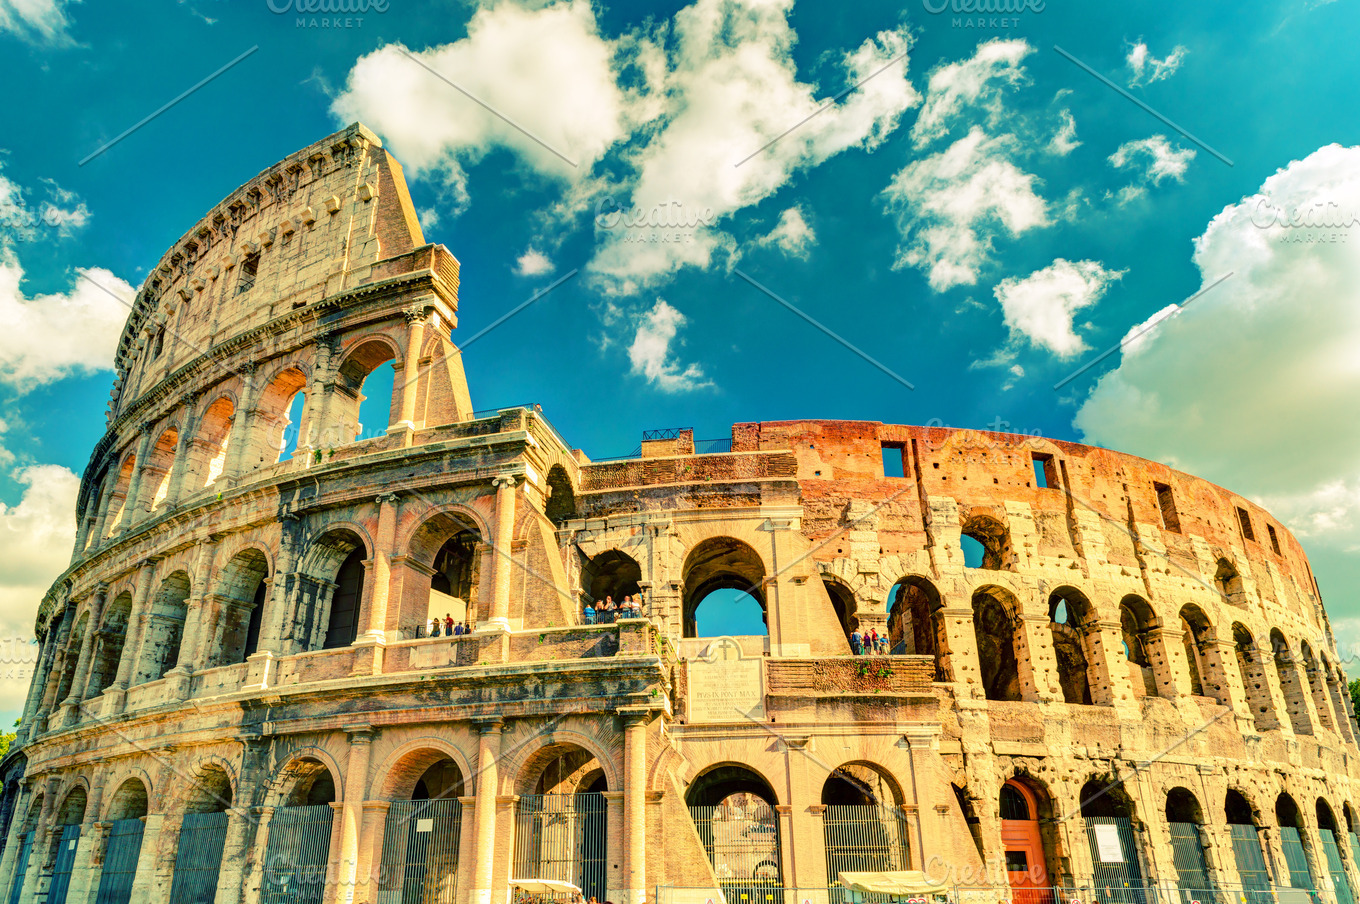 Colosseum (Coliseum) in Rome | High-Quality Architecture Stock Photos ...